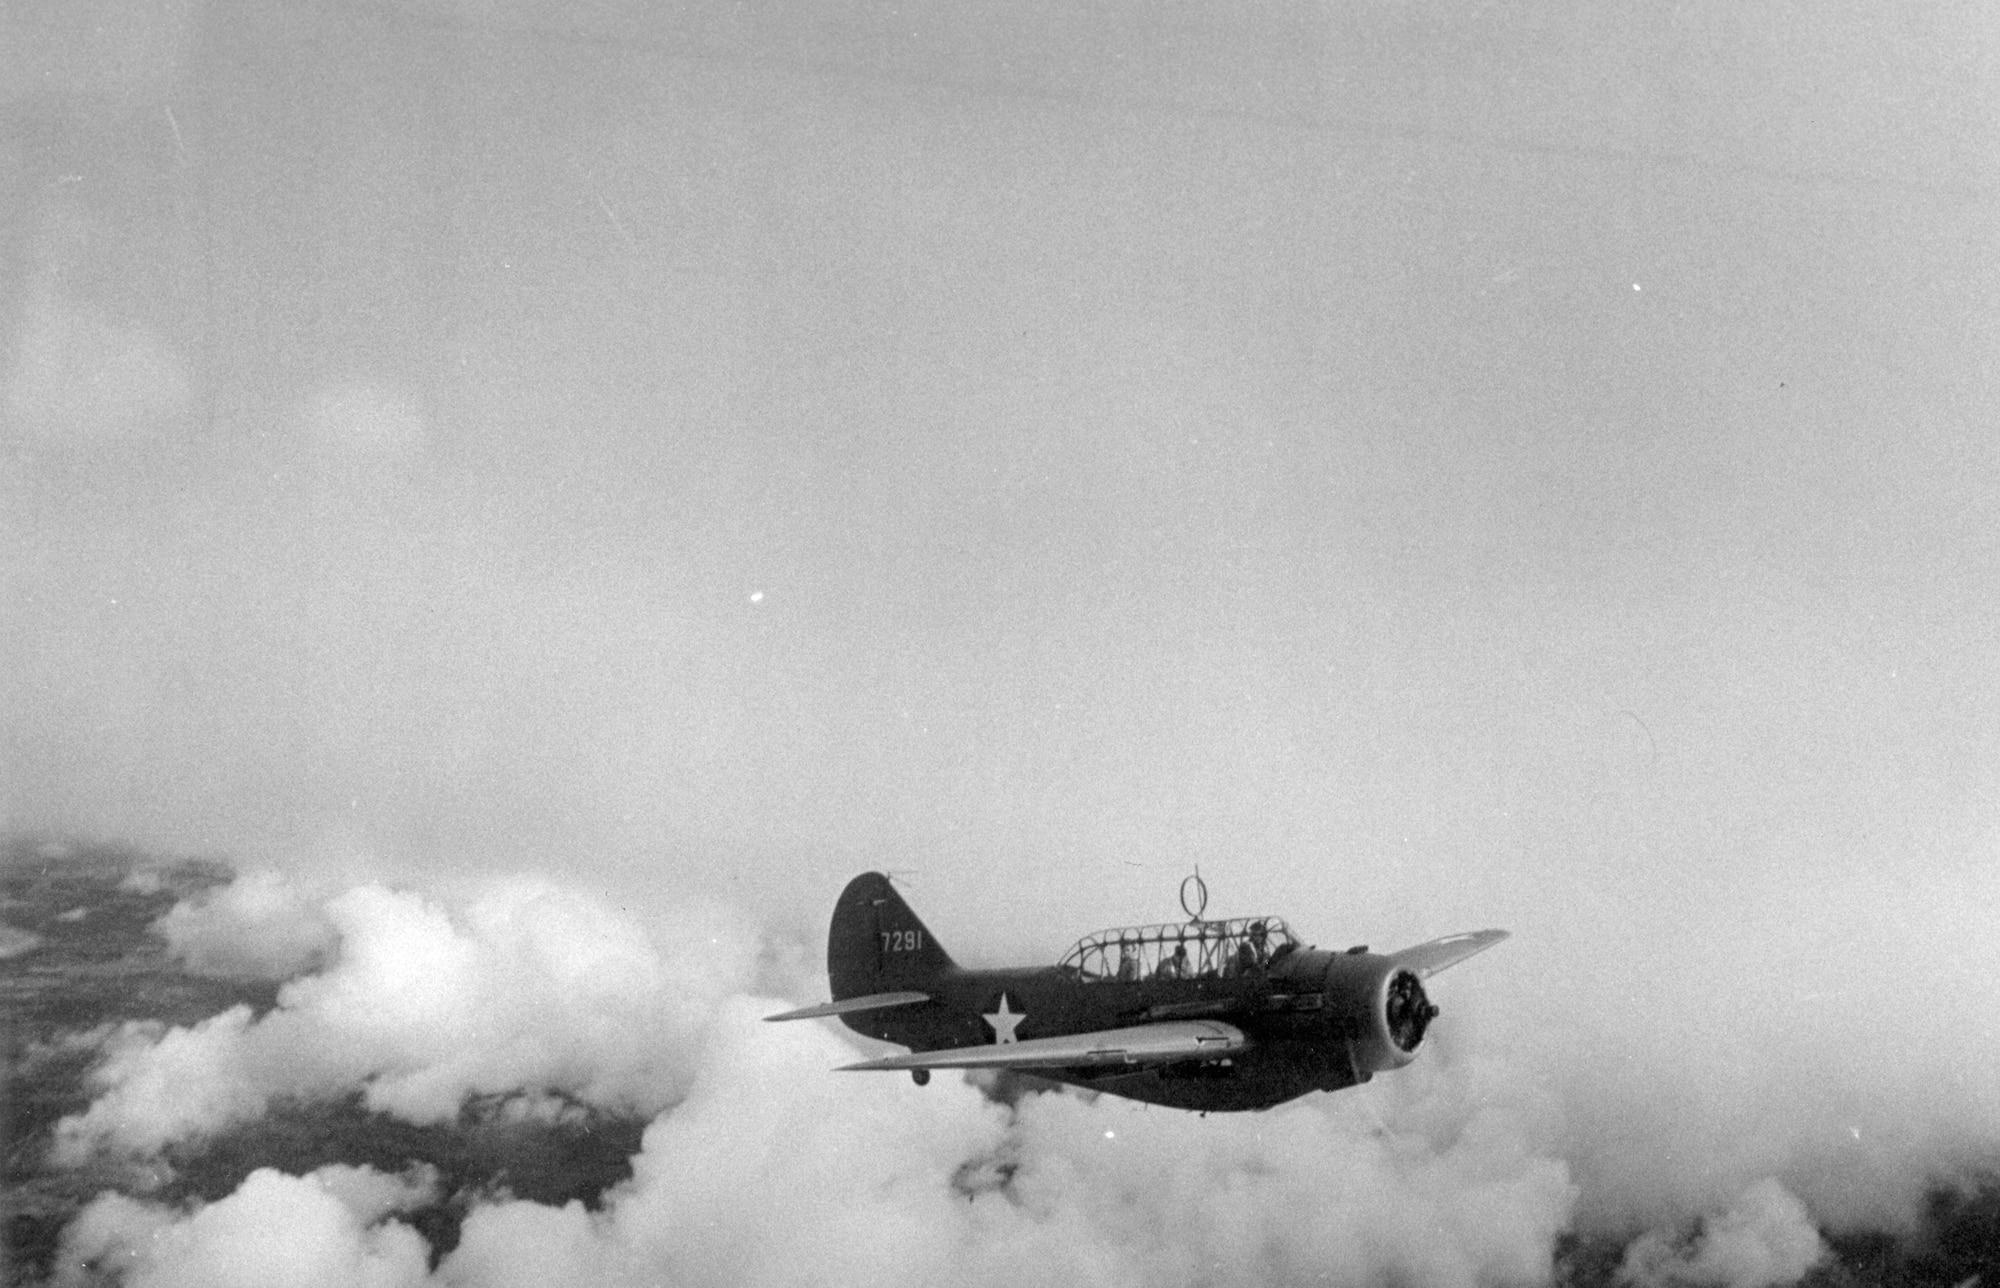 A Cyclone-Roaring December 7:  The 123rd Observation Squadron Goes to War